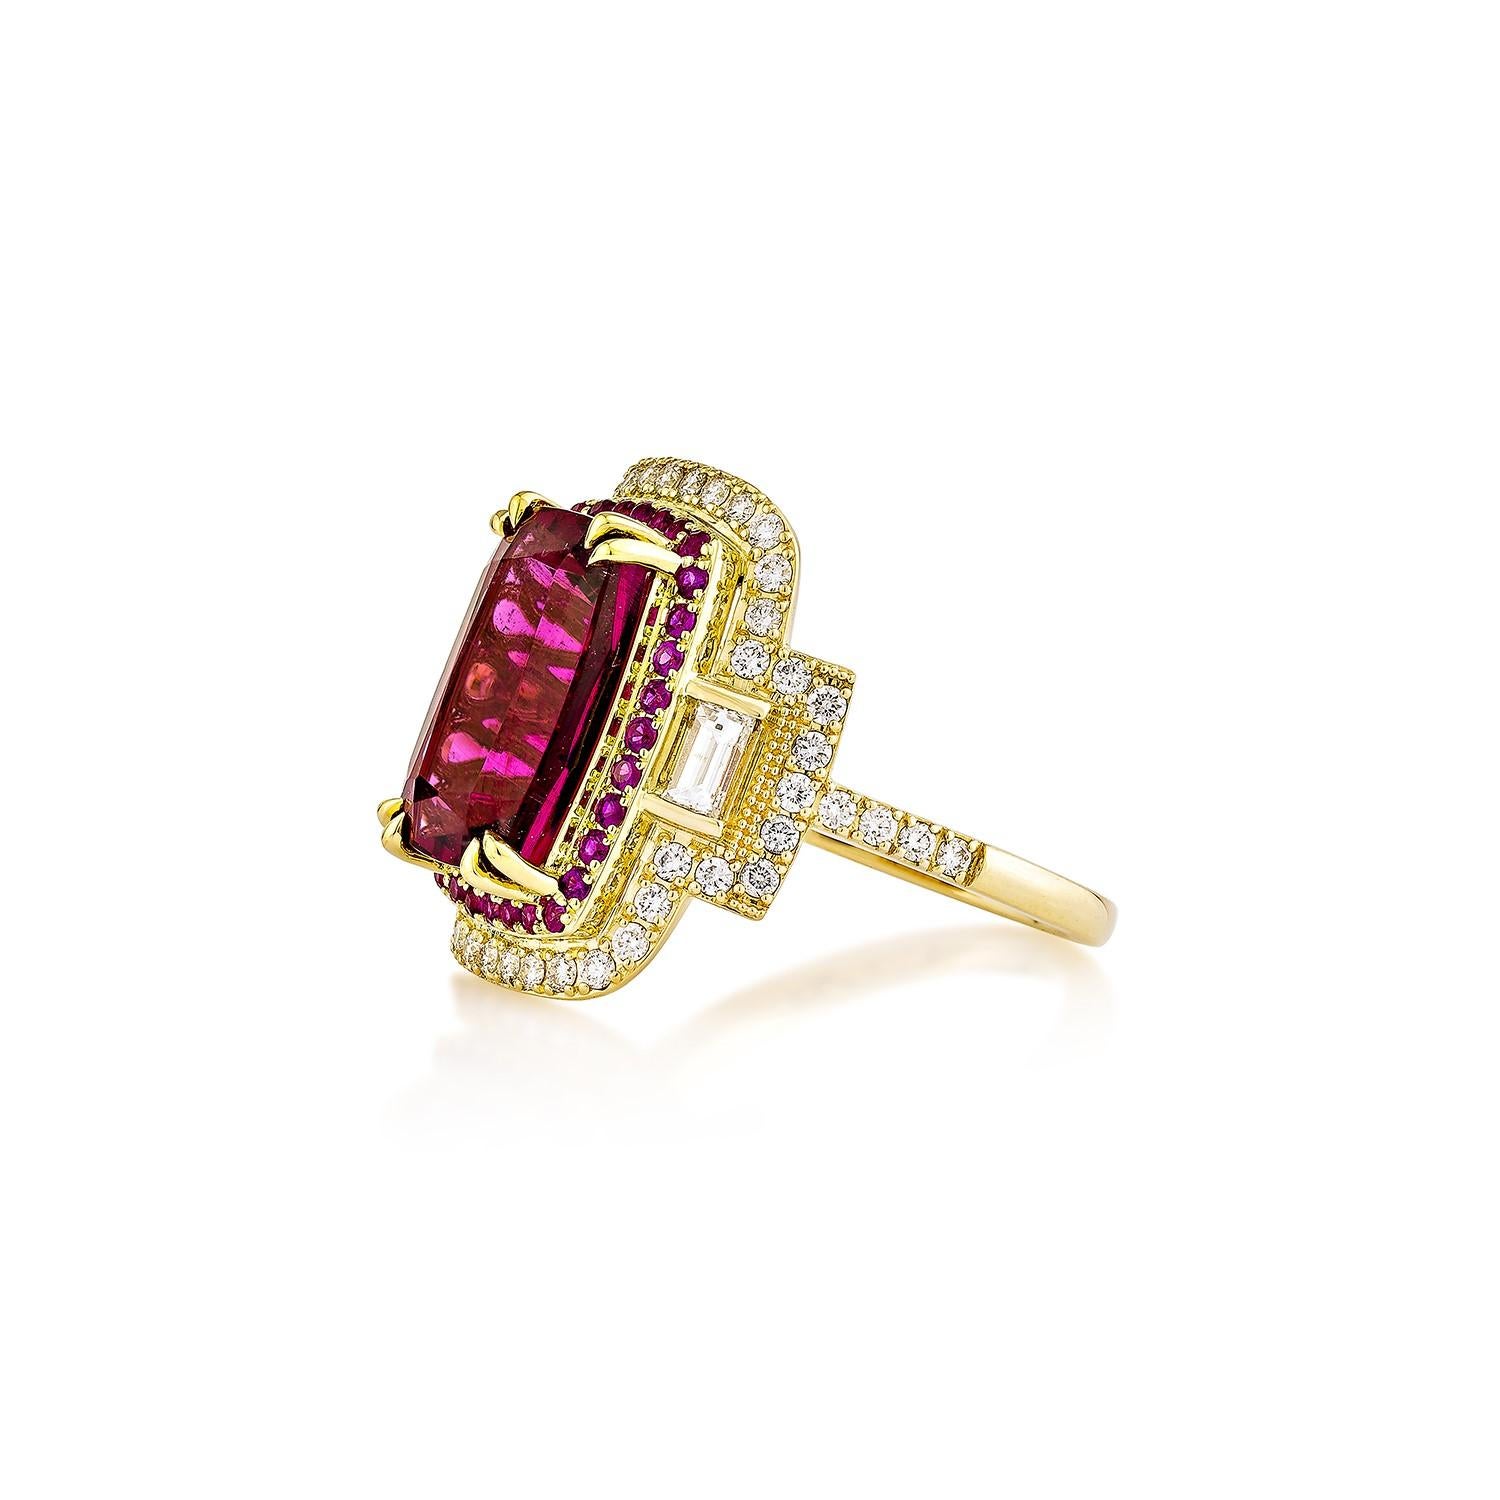 Cushion Cut 6.37 Carat Rubellite Cocktail Ring in 18Karat Yellow Gold with Ruby and Diamond. For Sale